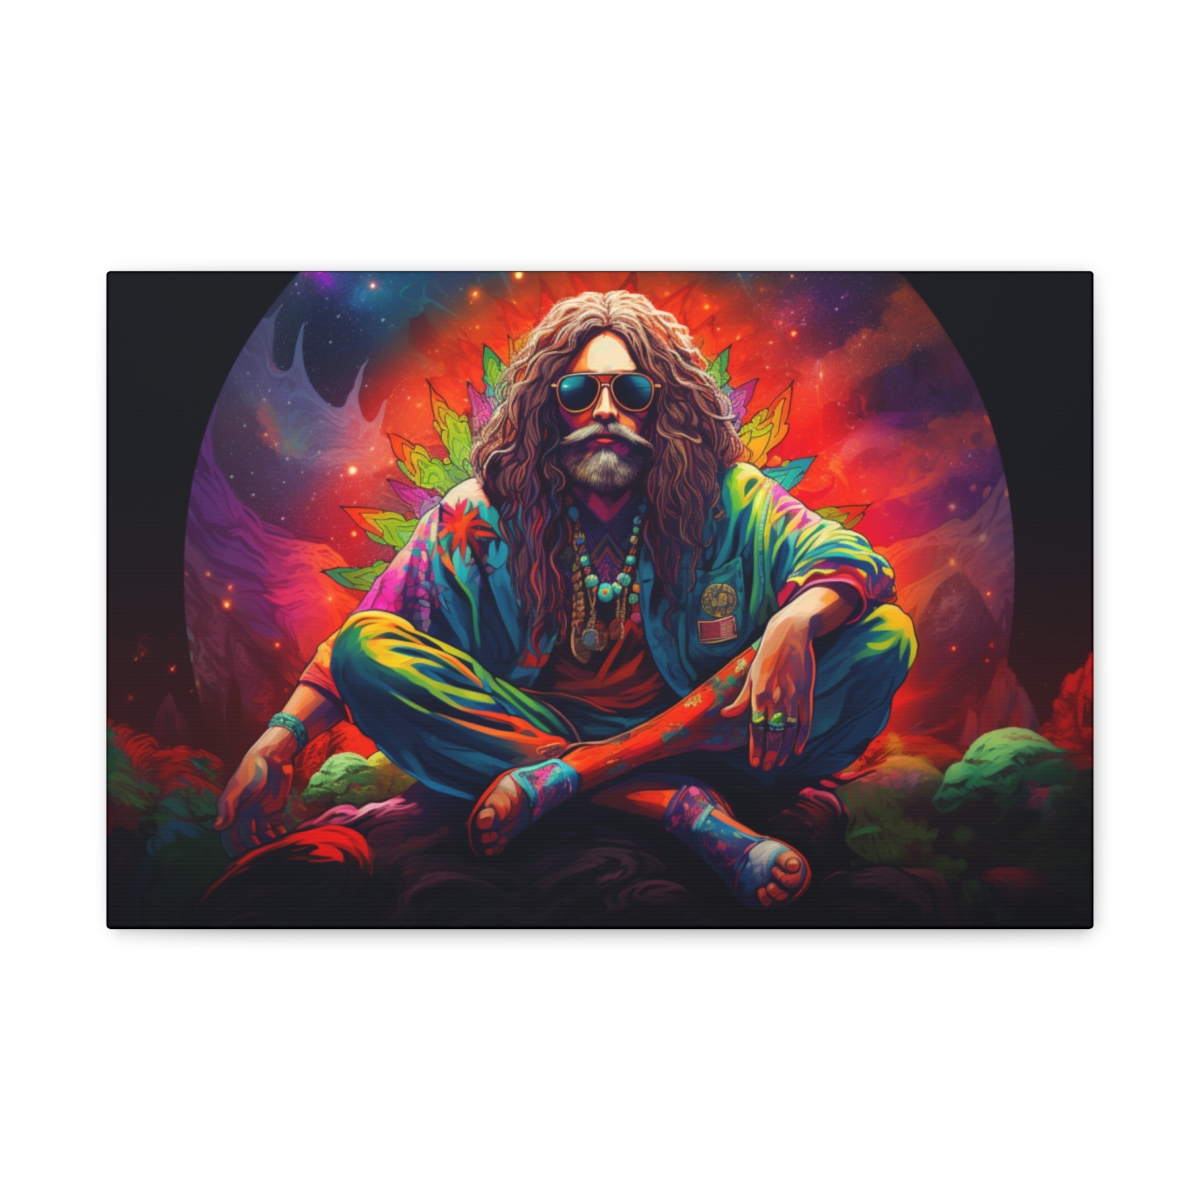 Hippie Trippy Art Canvas Print: Are You Ready For The Trippy?